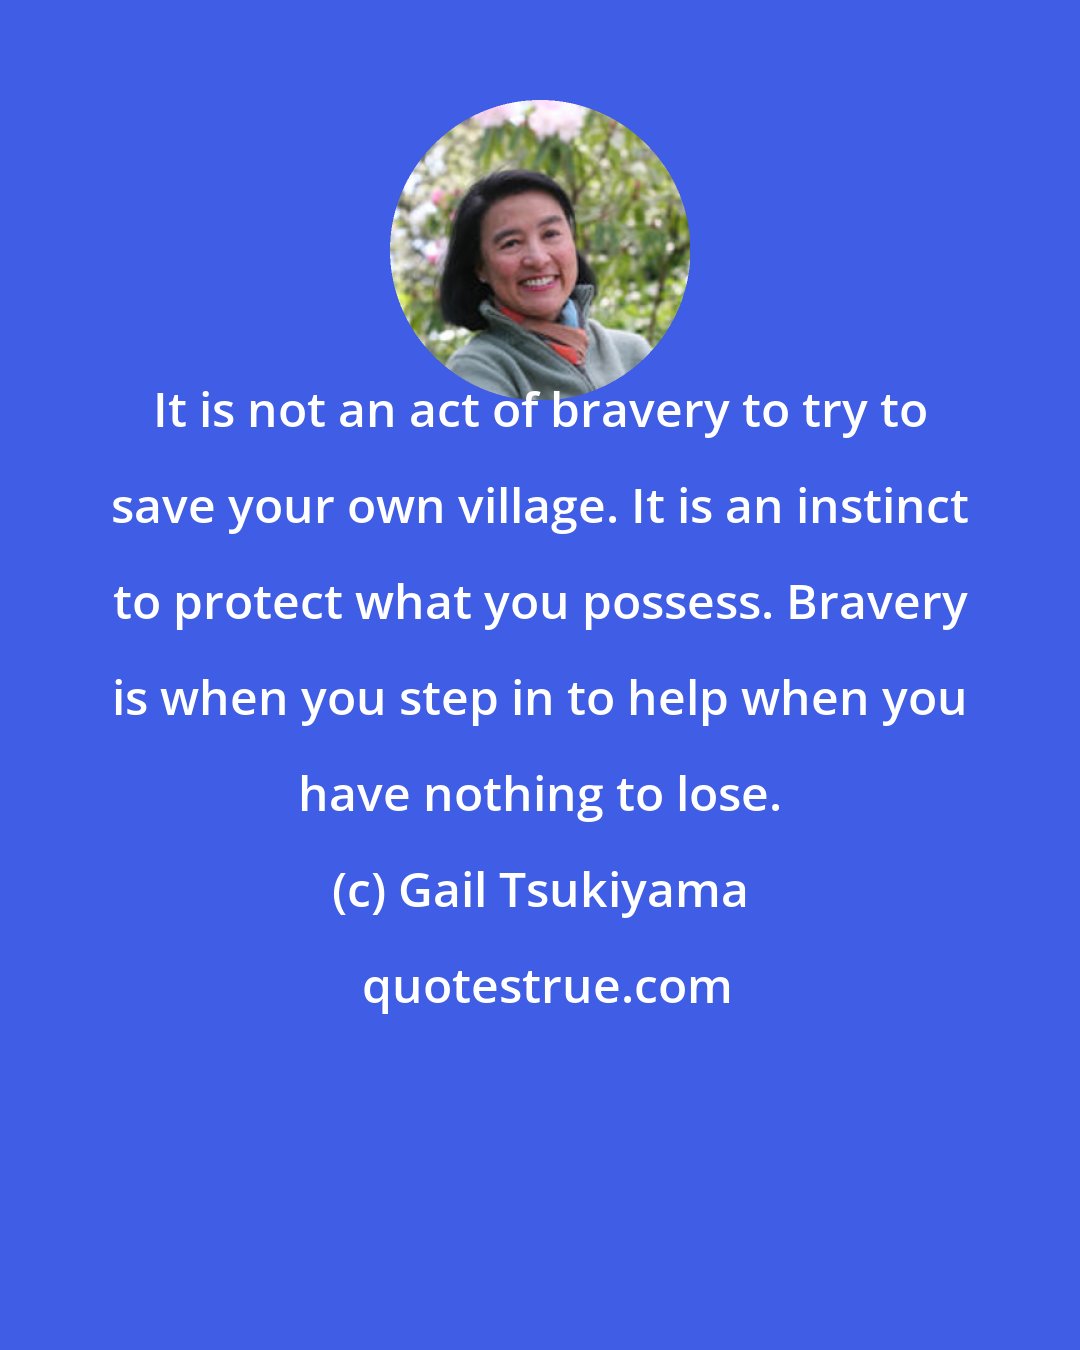 Gail Tsukiyama: It is not an act of bravery to try to save your own village. It is an instinct to protect what you possess. Bravery is when you step in to help when you have nothing to lose.